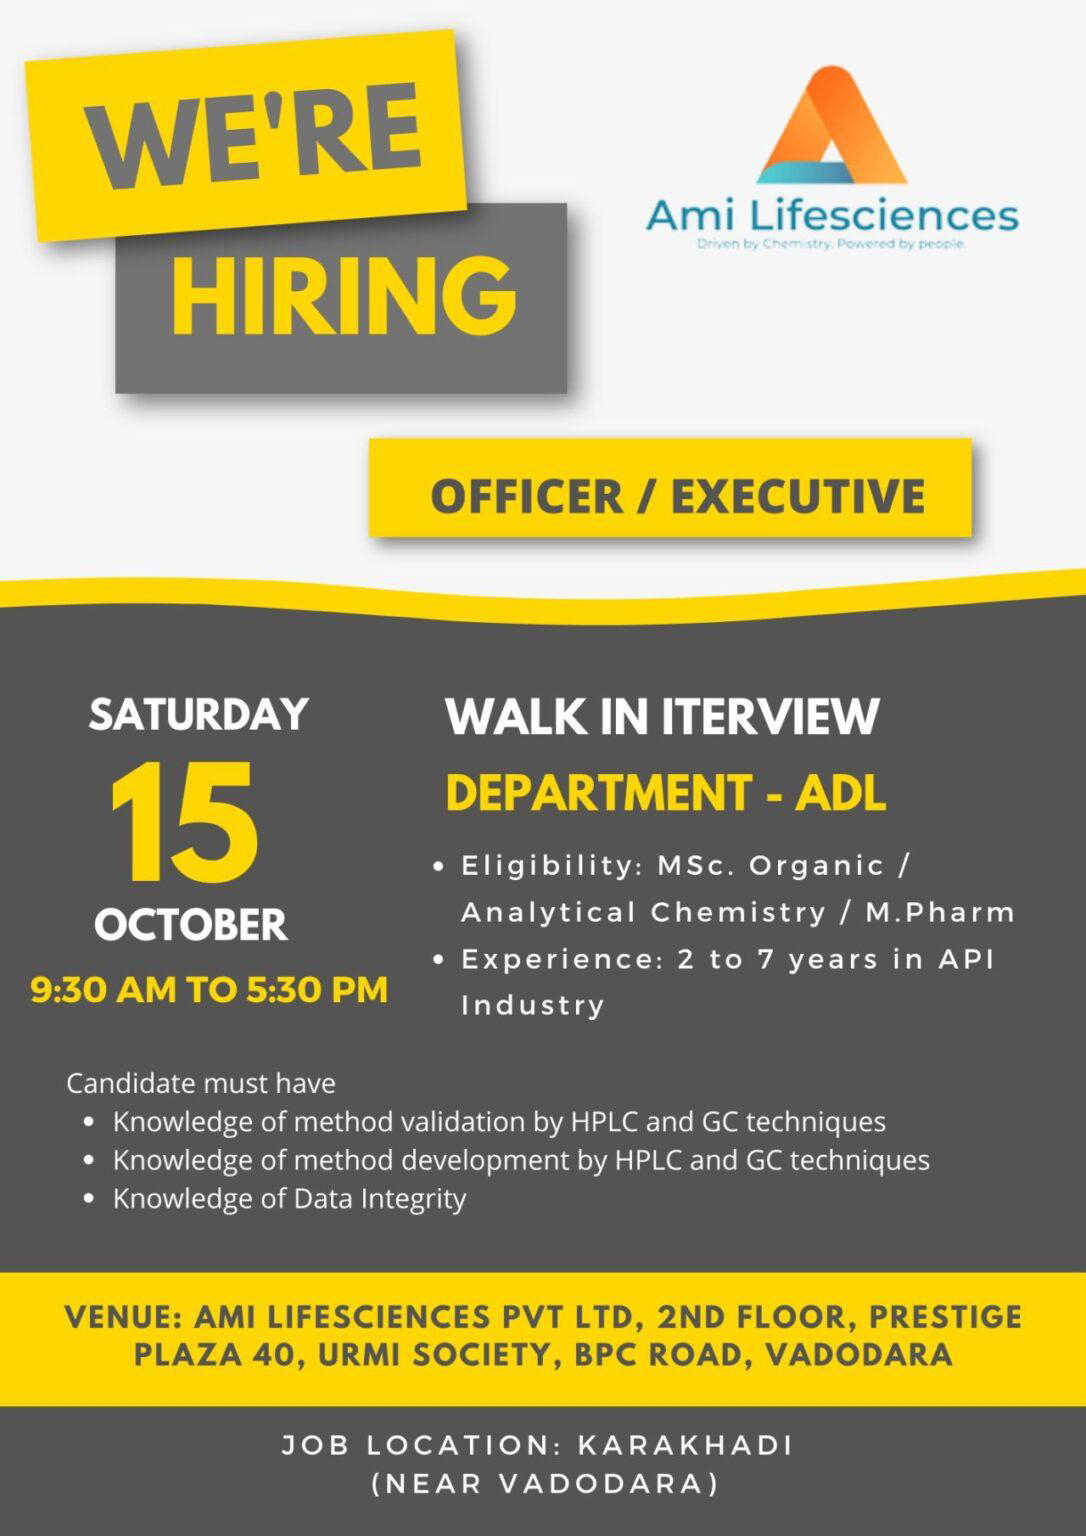 Job Available's for Ami Lifesciences Walk-In Interview for MSc Organic/ Analytical Chemistry/ M Pharm